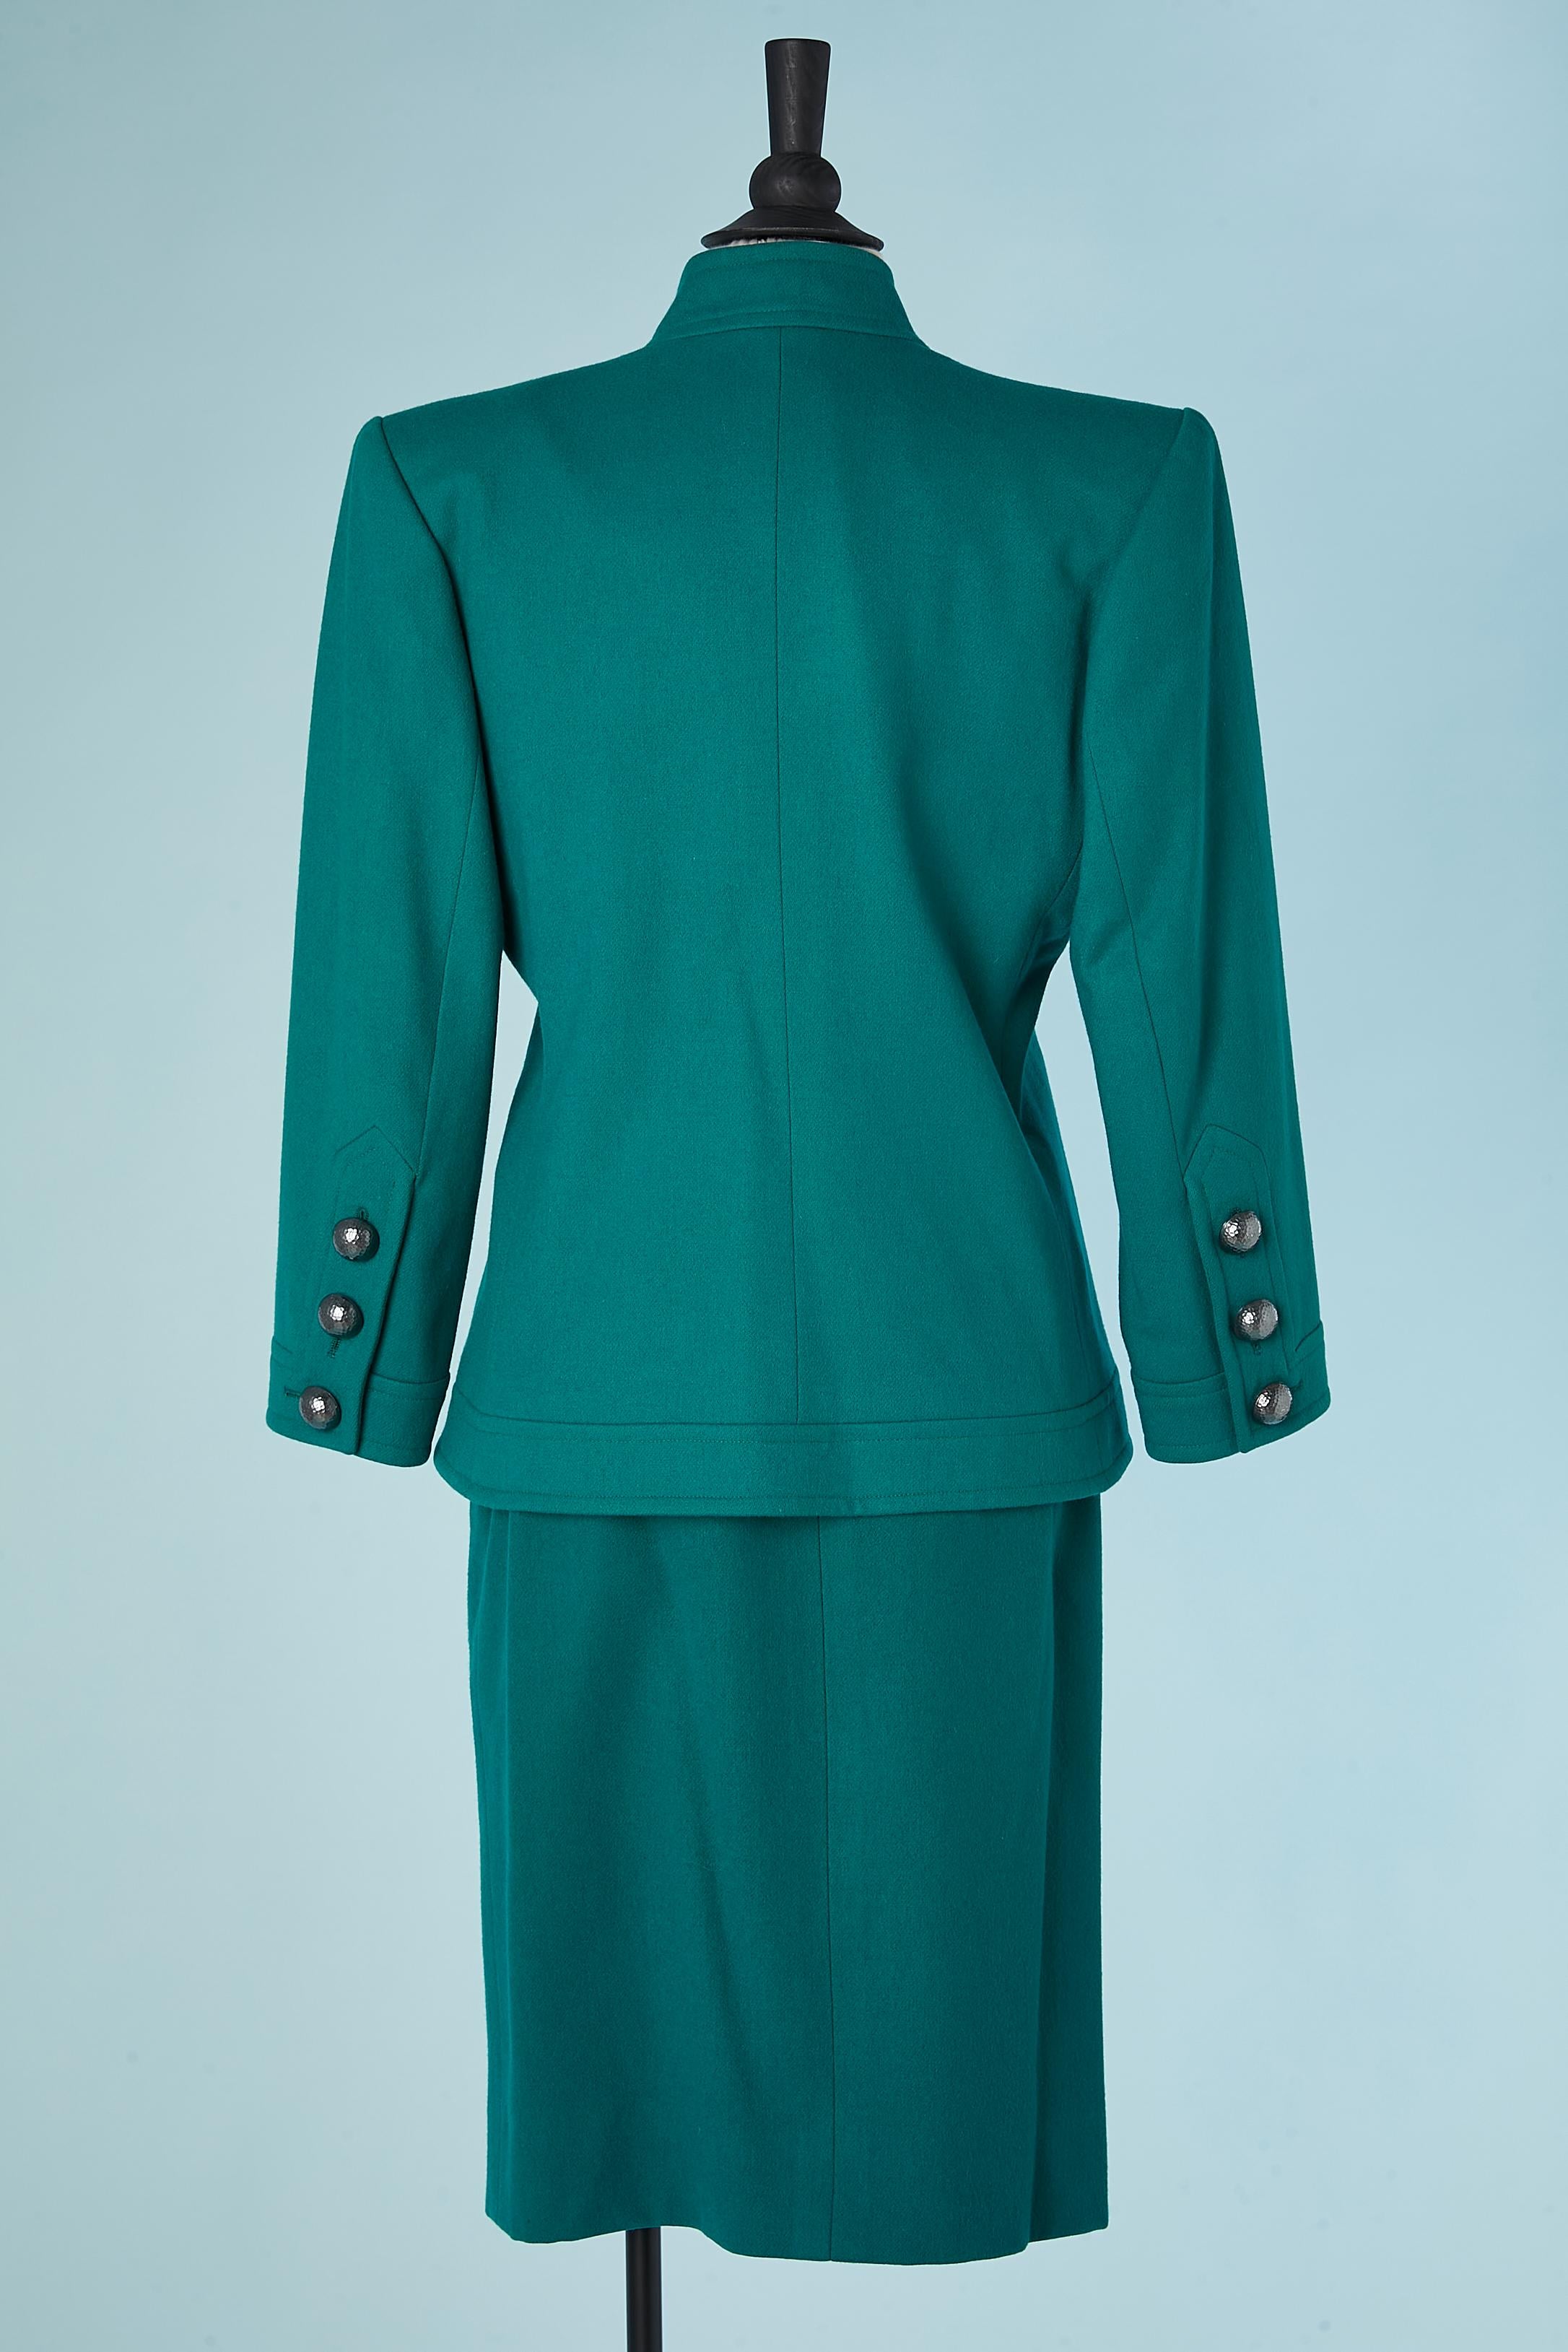 Green wool skirt-suit with graphic collar Saint Laurent Rive Gauche Circa 1980's For Sale 3